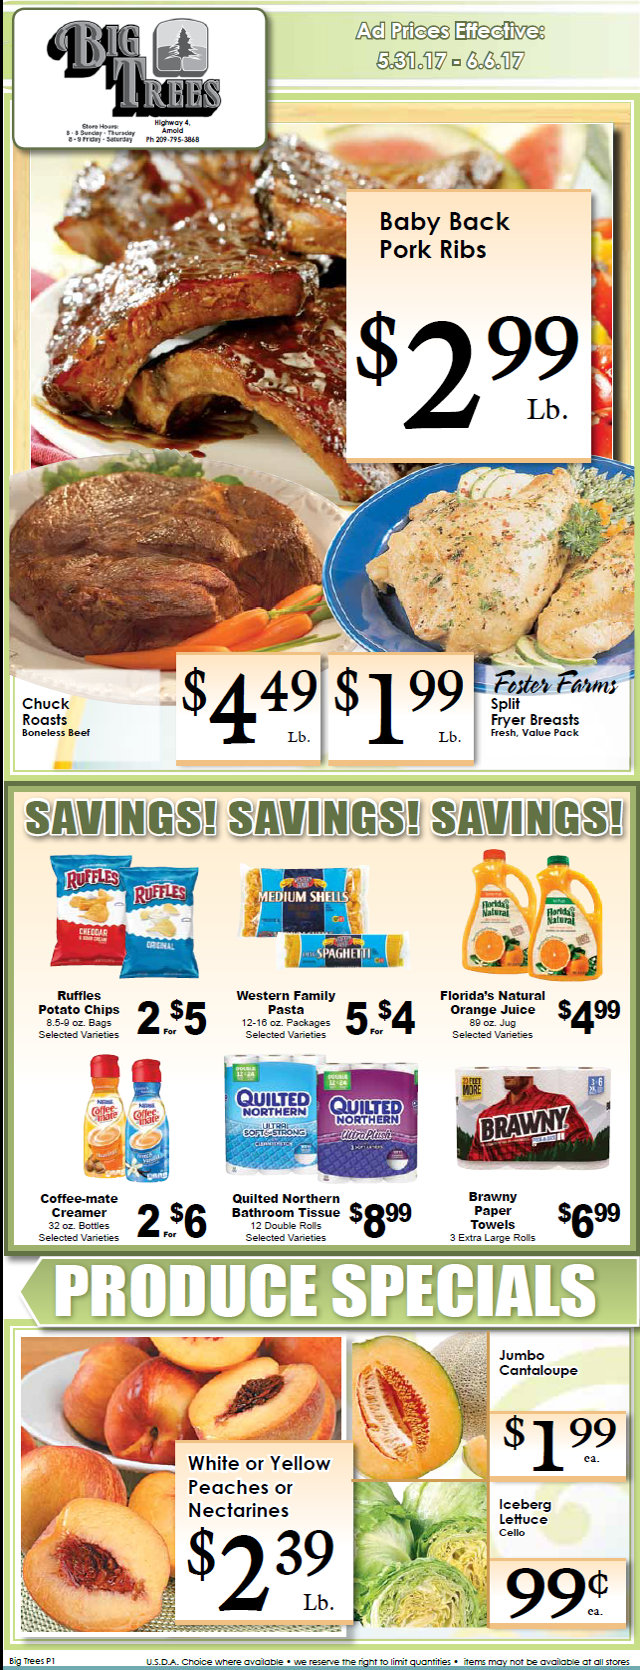 Big Trees Market Weekly Ad & Grocery Specials Through June 6th